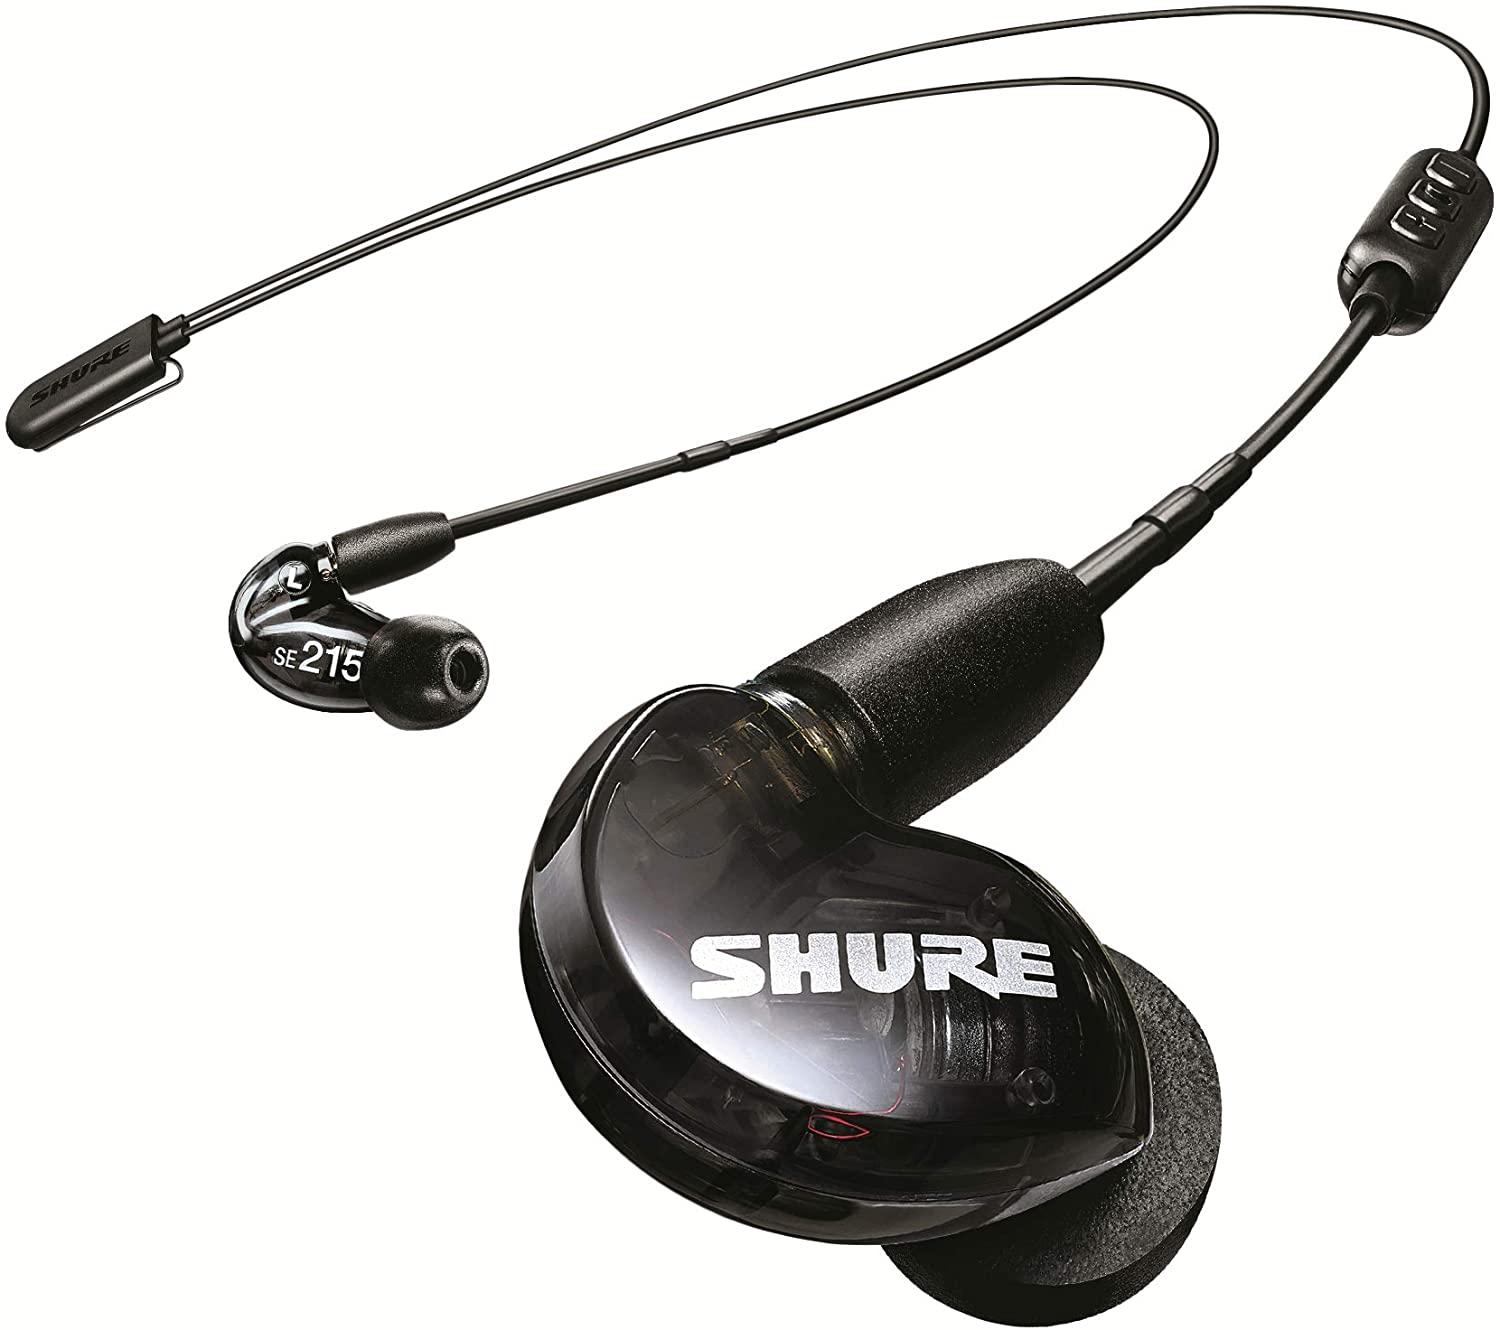 Shure SE215 BT2 Wireless Sound Isolating Earbuds for $59 Shipped